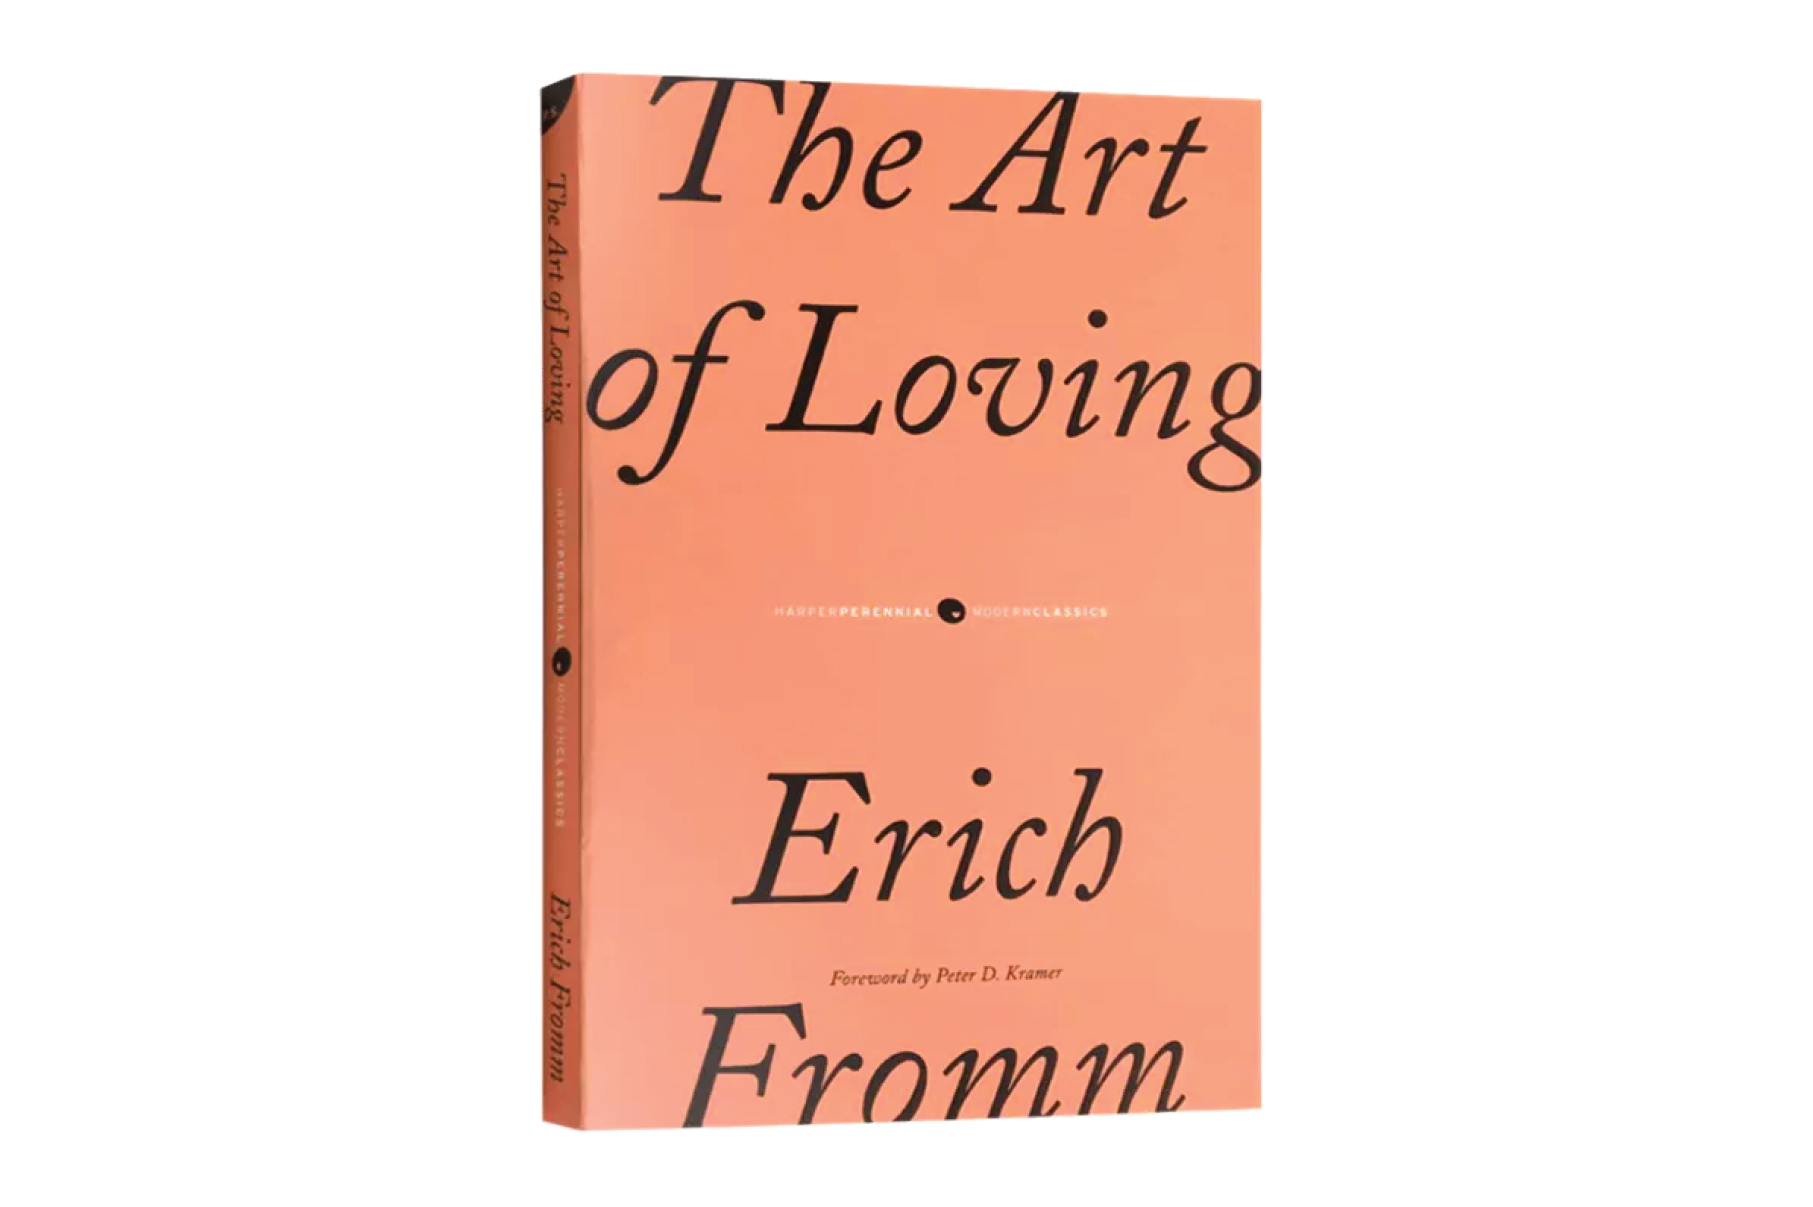 The Art of Loving by Erich Fromm book cover